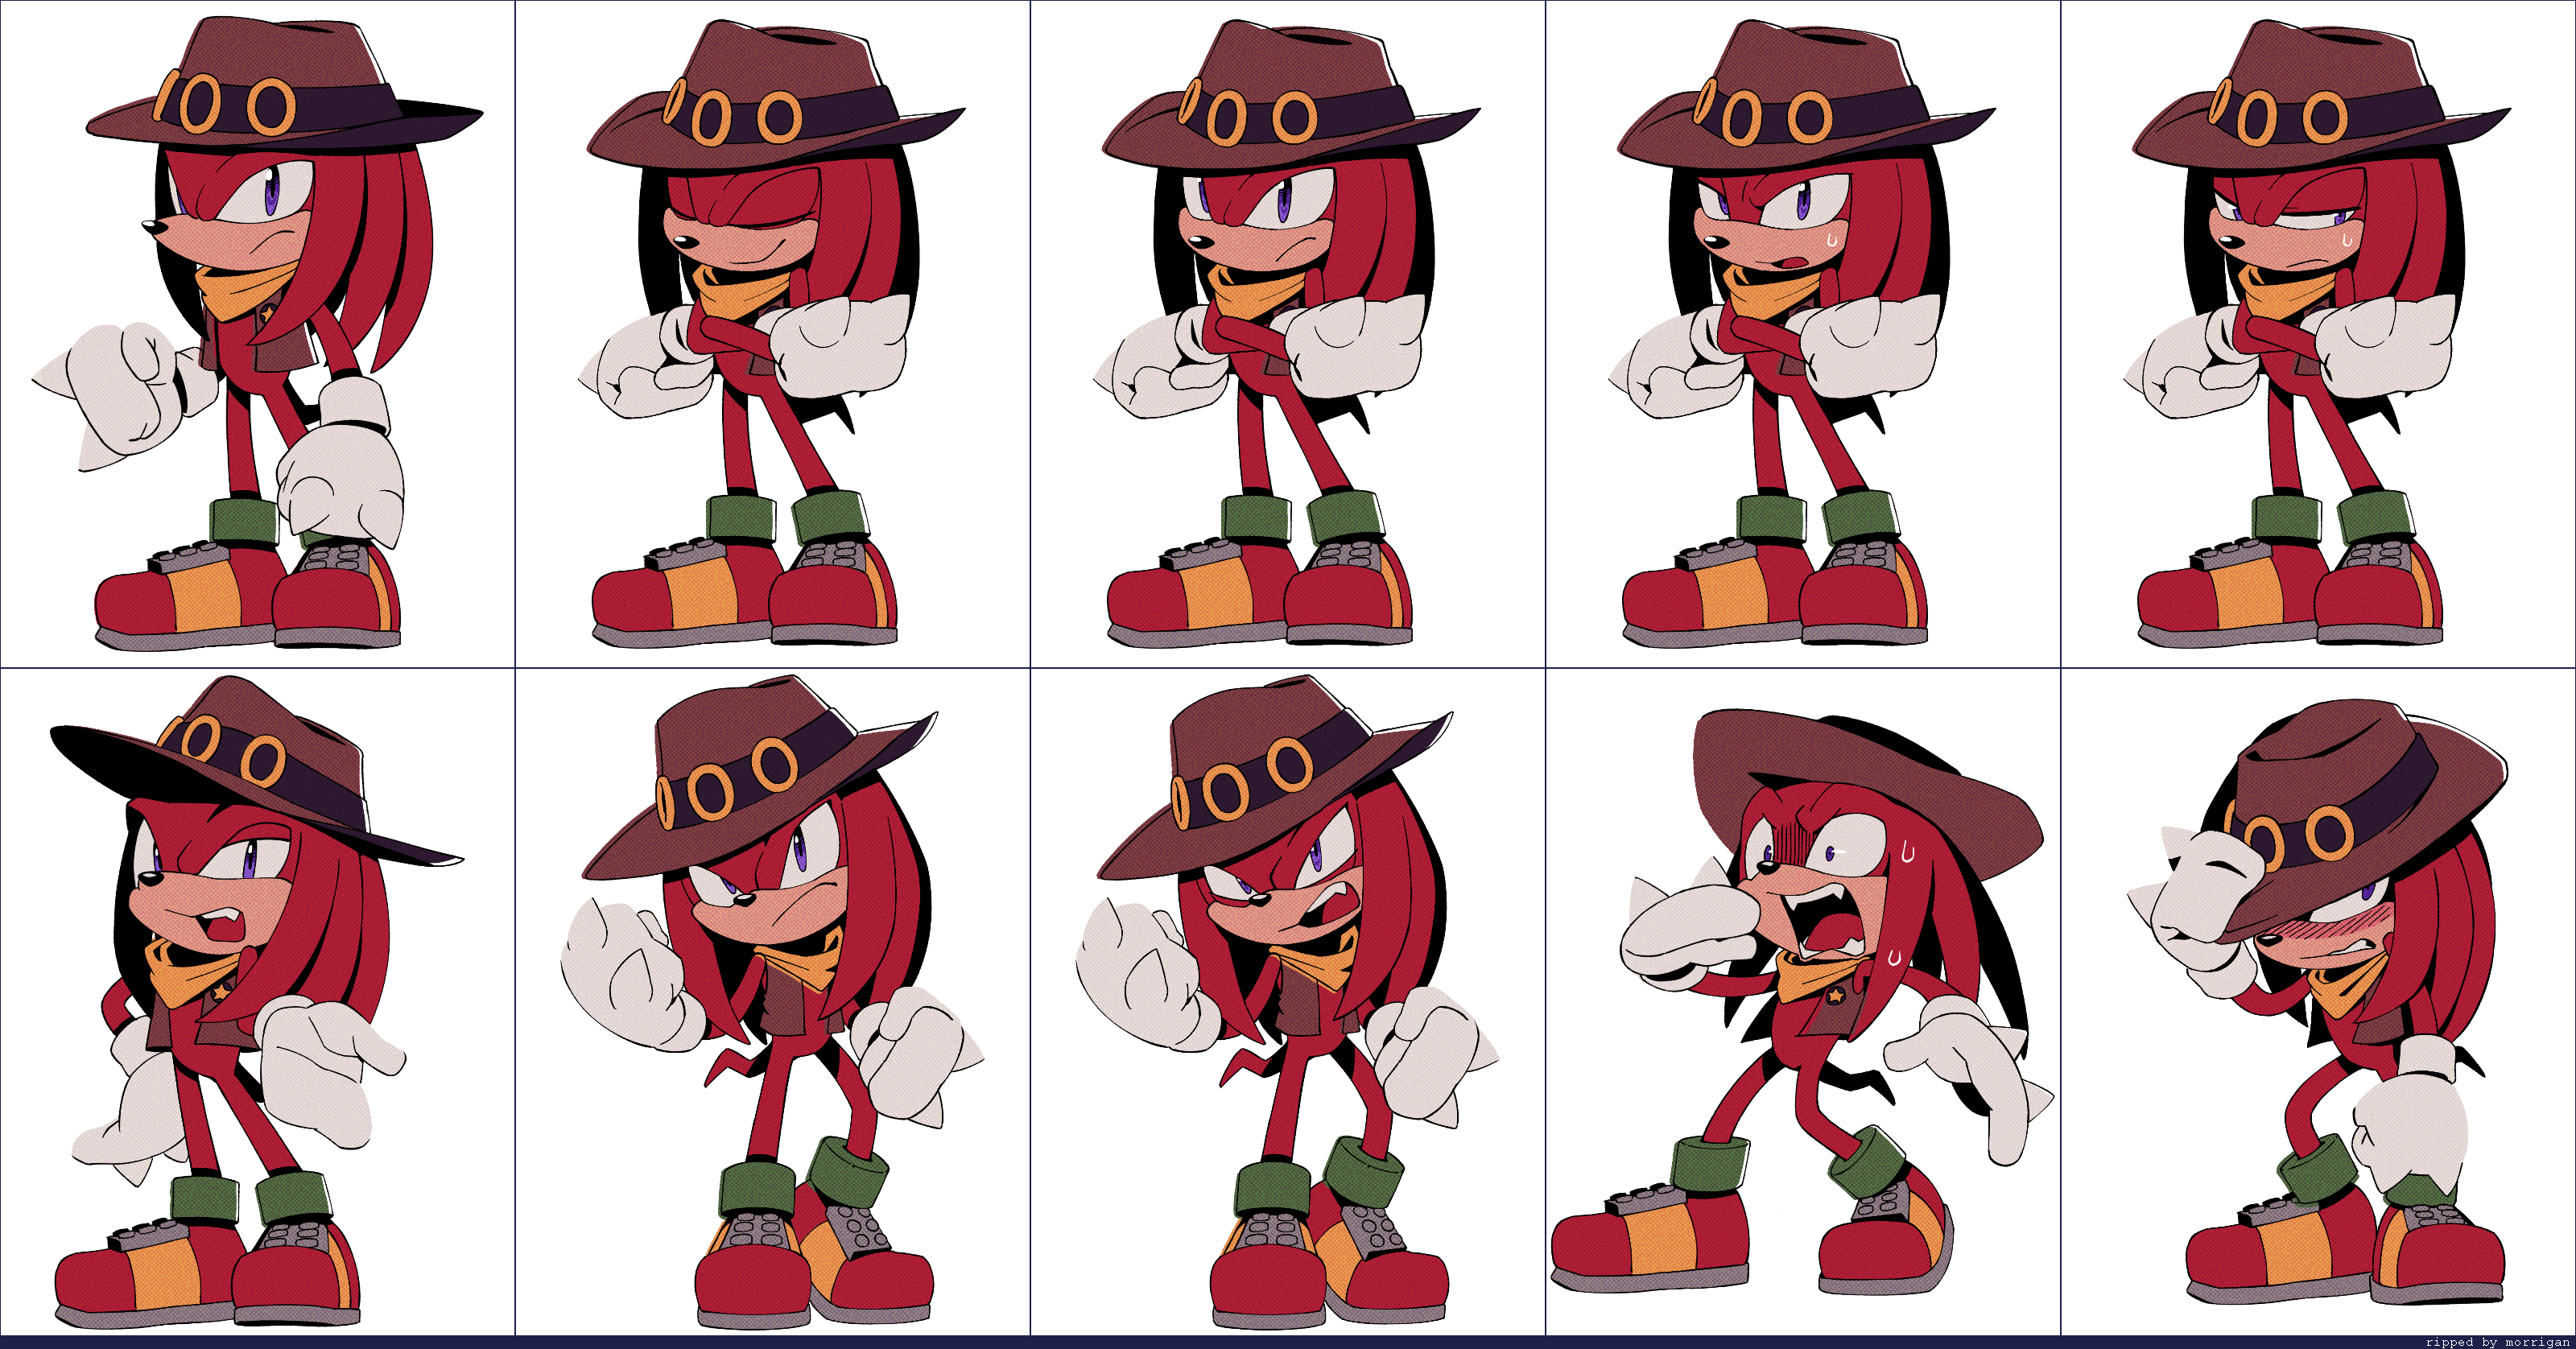 The Spriters Resource - Full Sheet View - Sonic & Knuckles